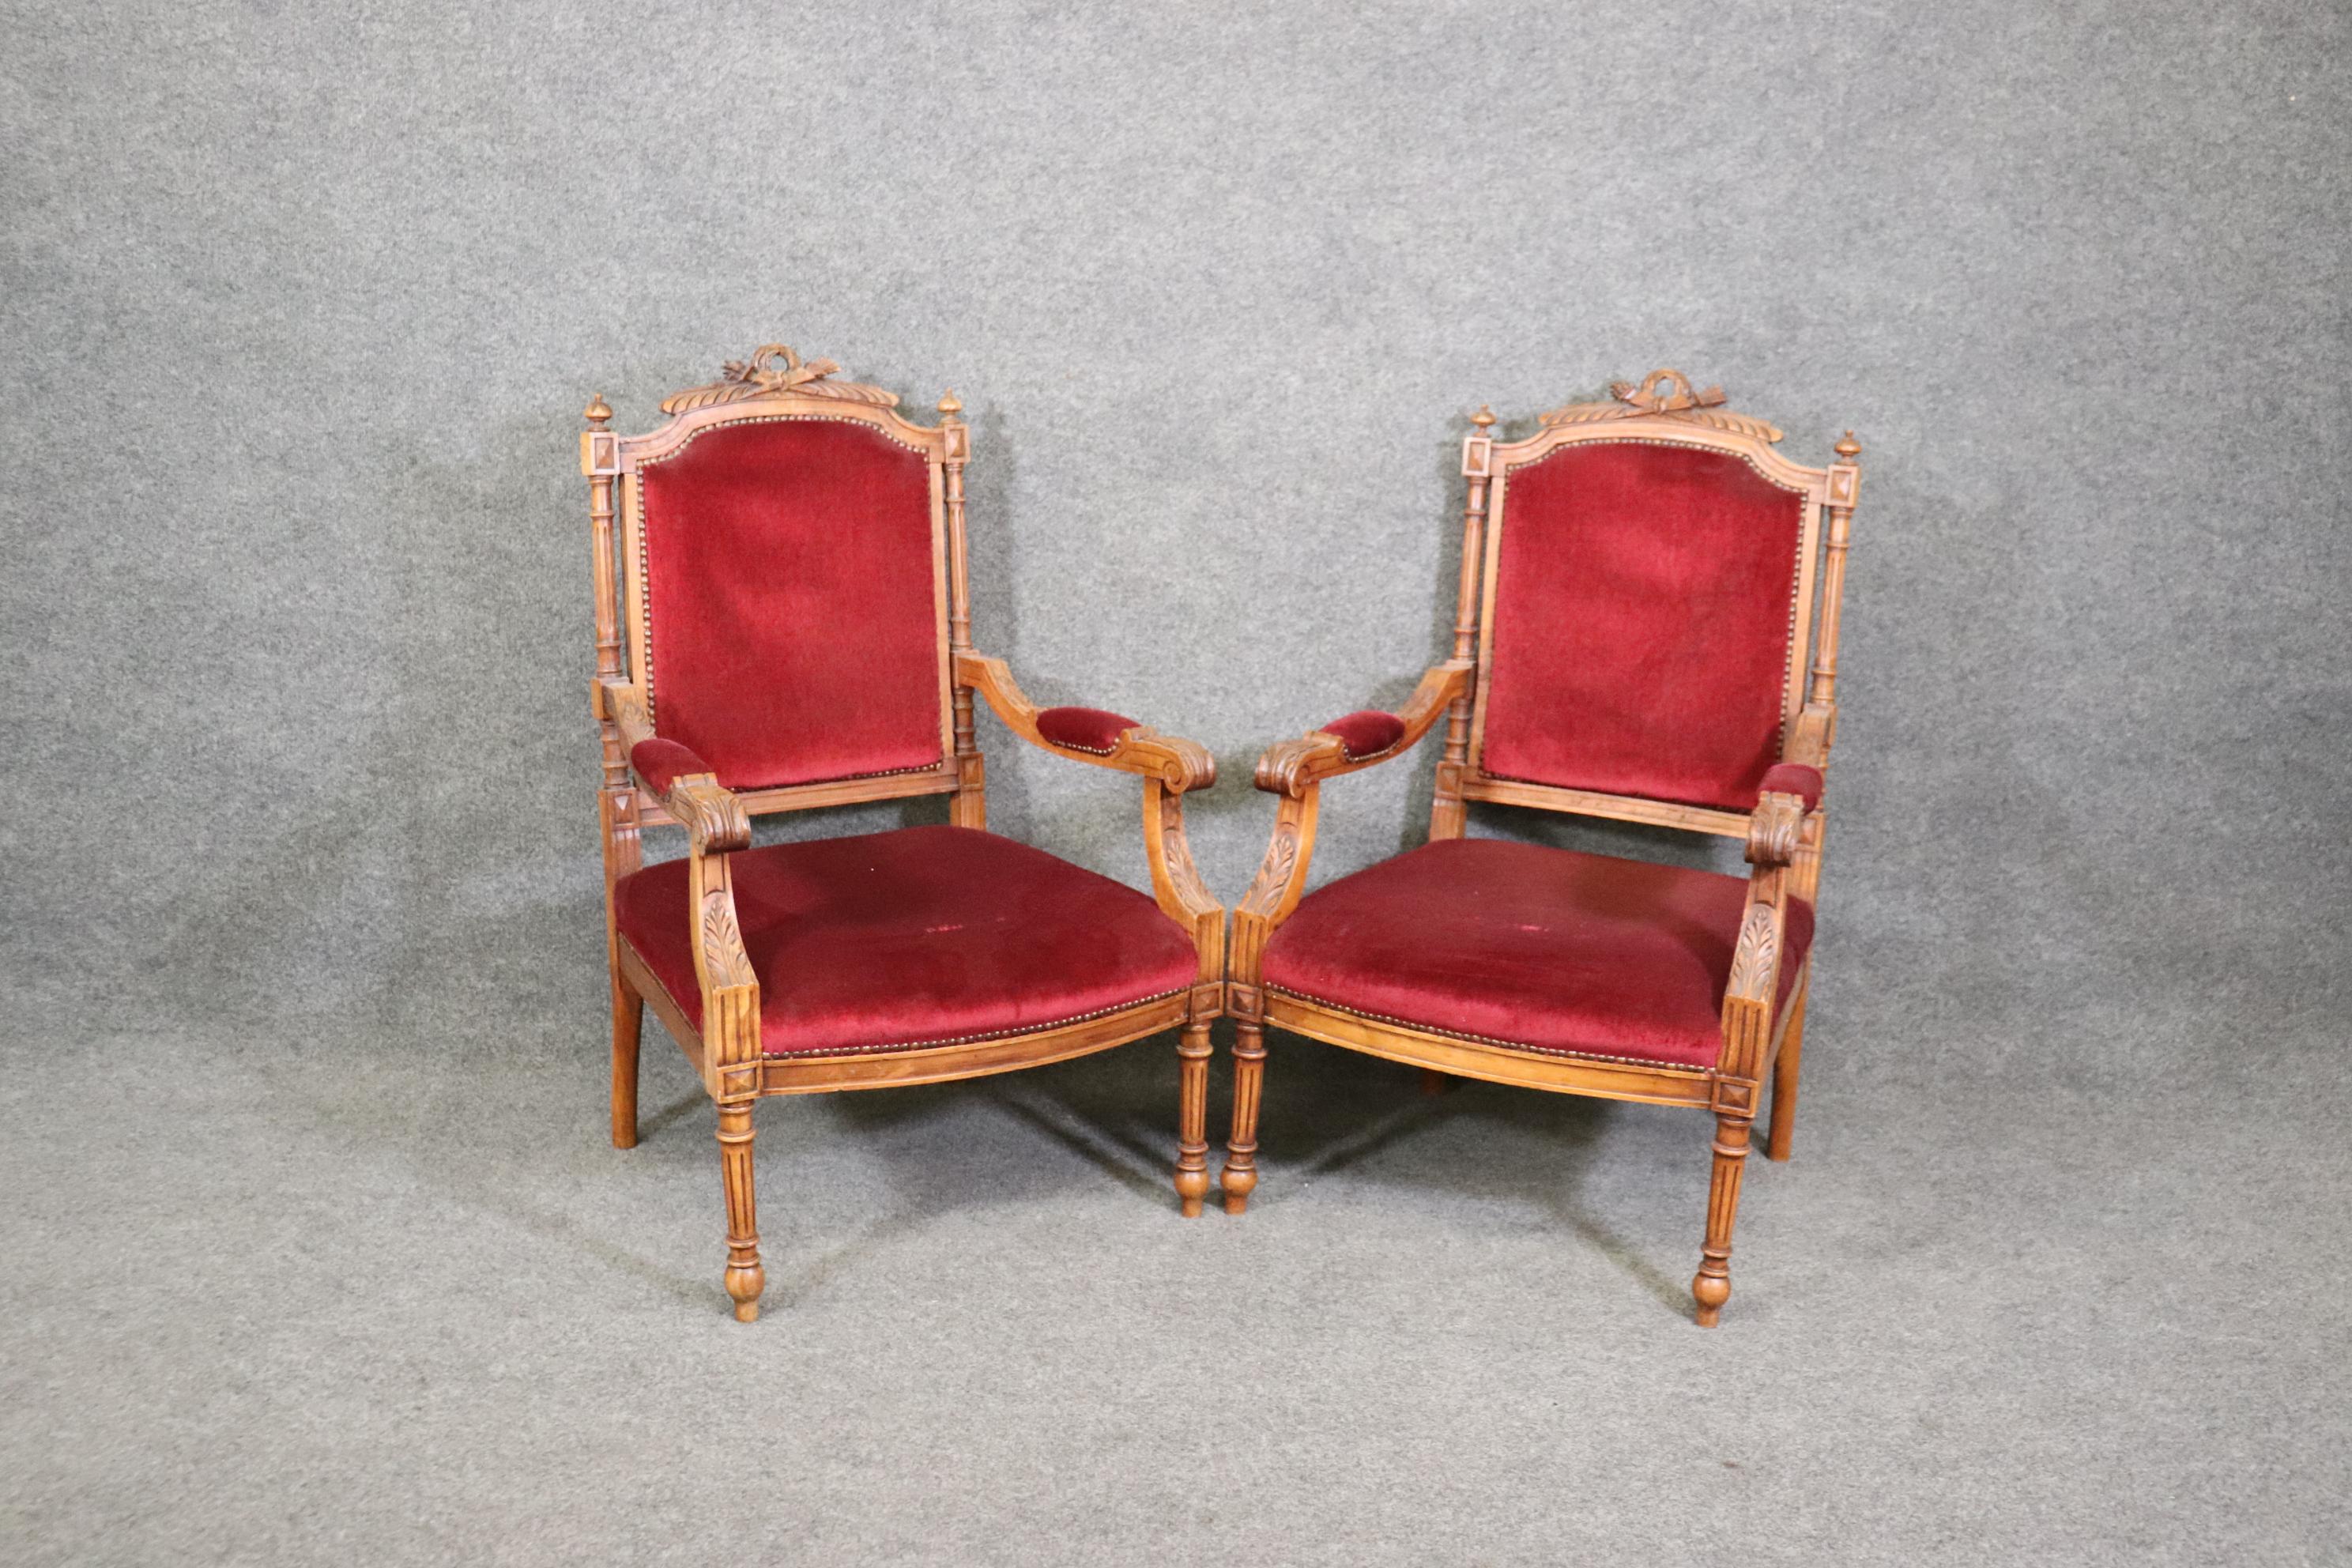 Pair of Carved Walnut Burgundy Velvet Louis XVI Fauteuil Armchairs, circa 1920 In Good Condition For Sale In Swedesboro, NJ